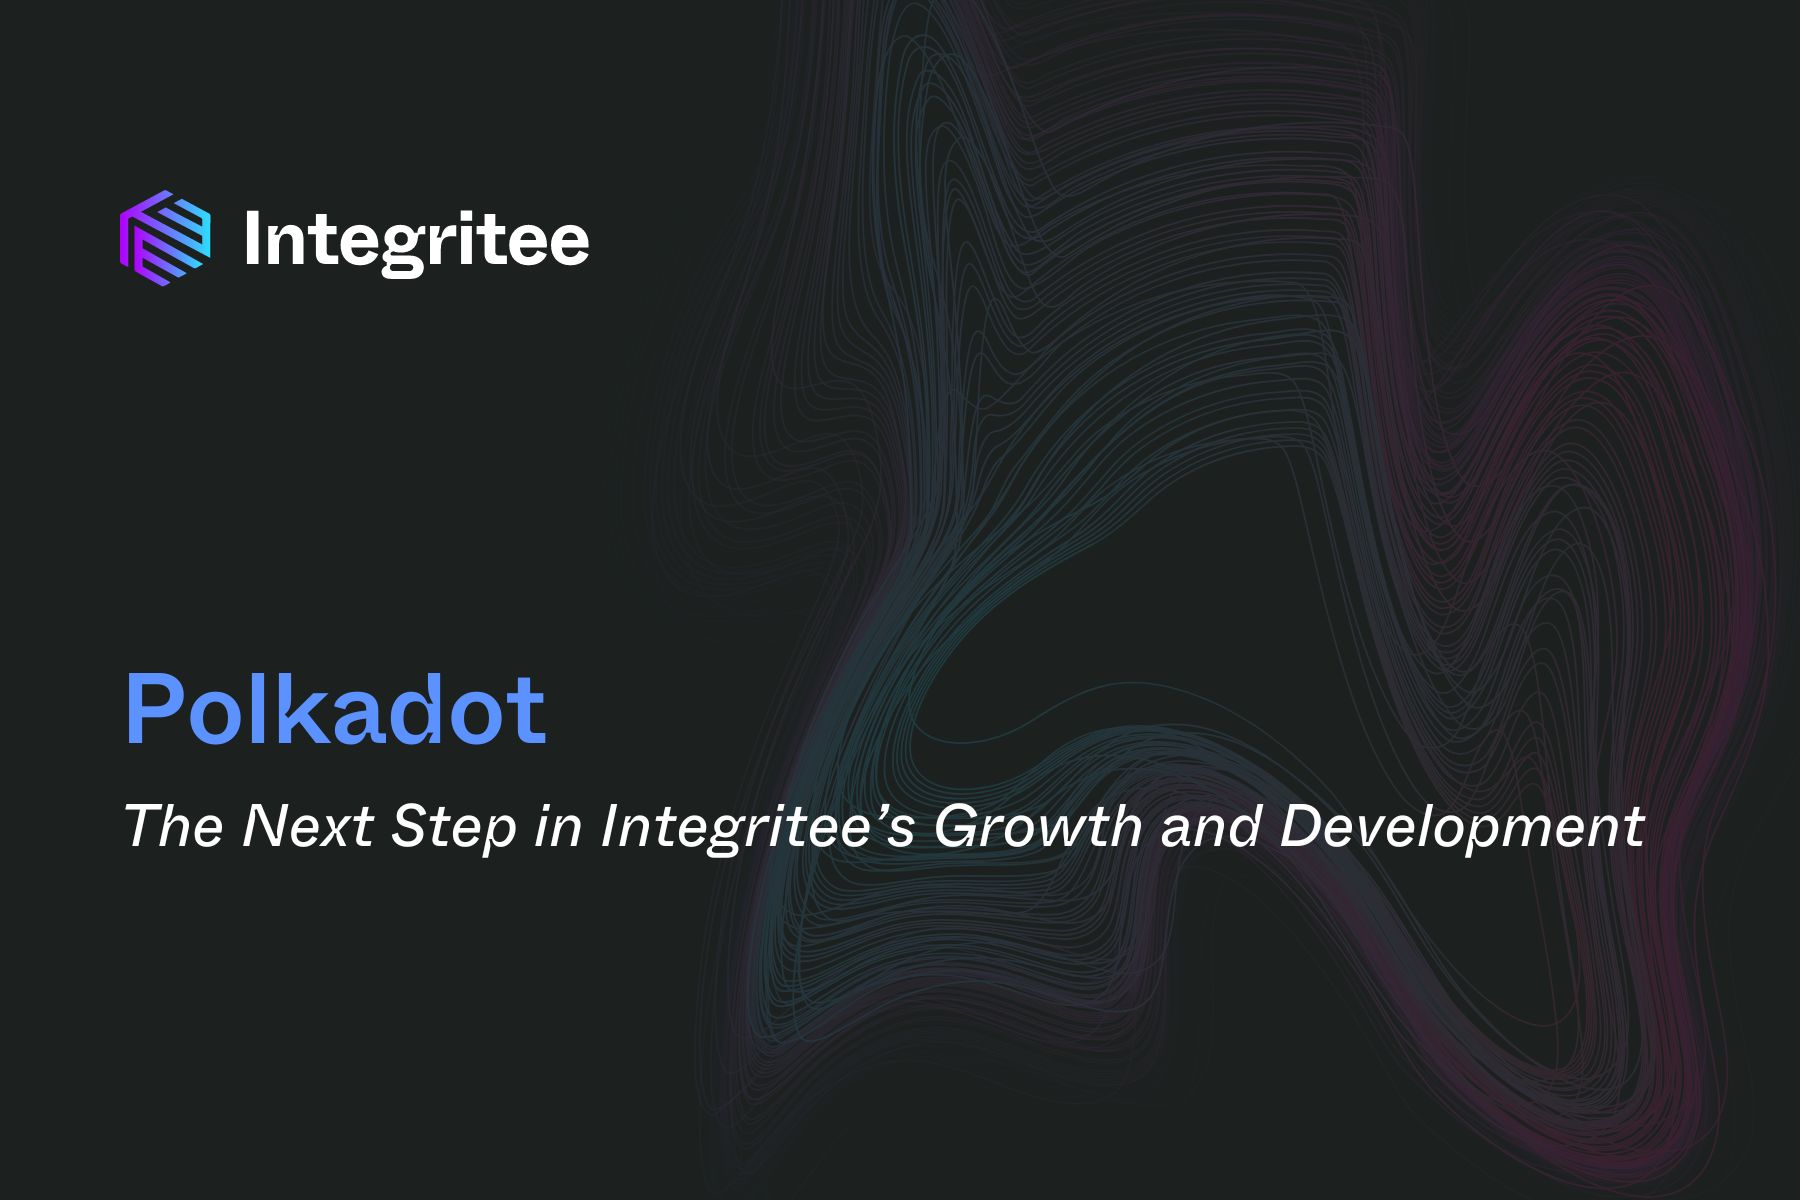 Polkadot: The Next Step in Integritee’s Growth and Development